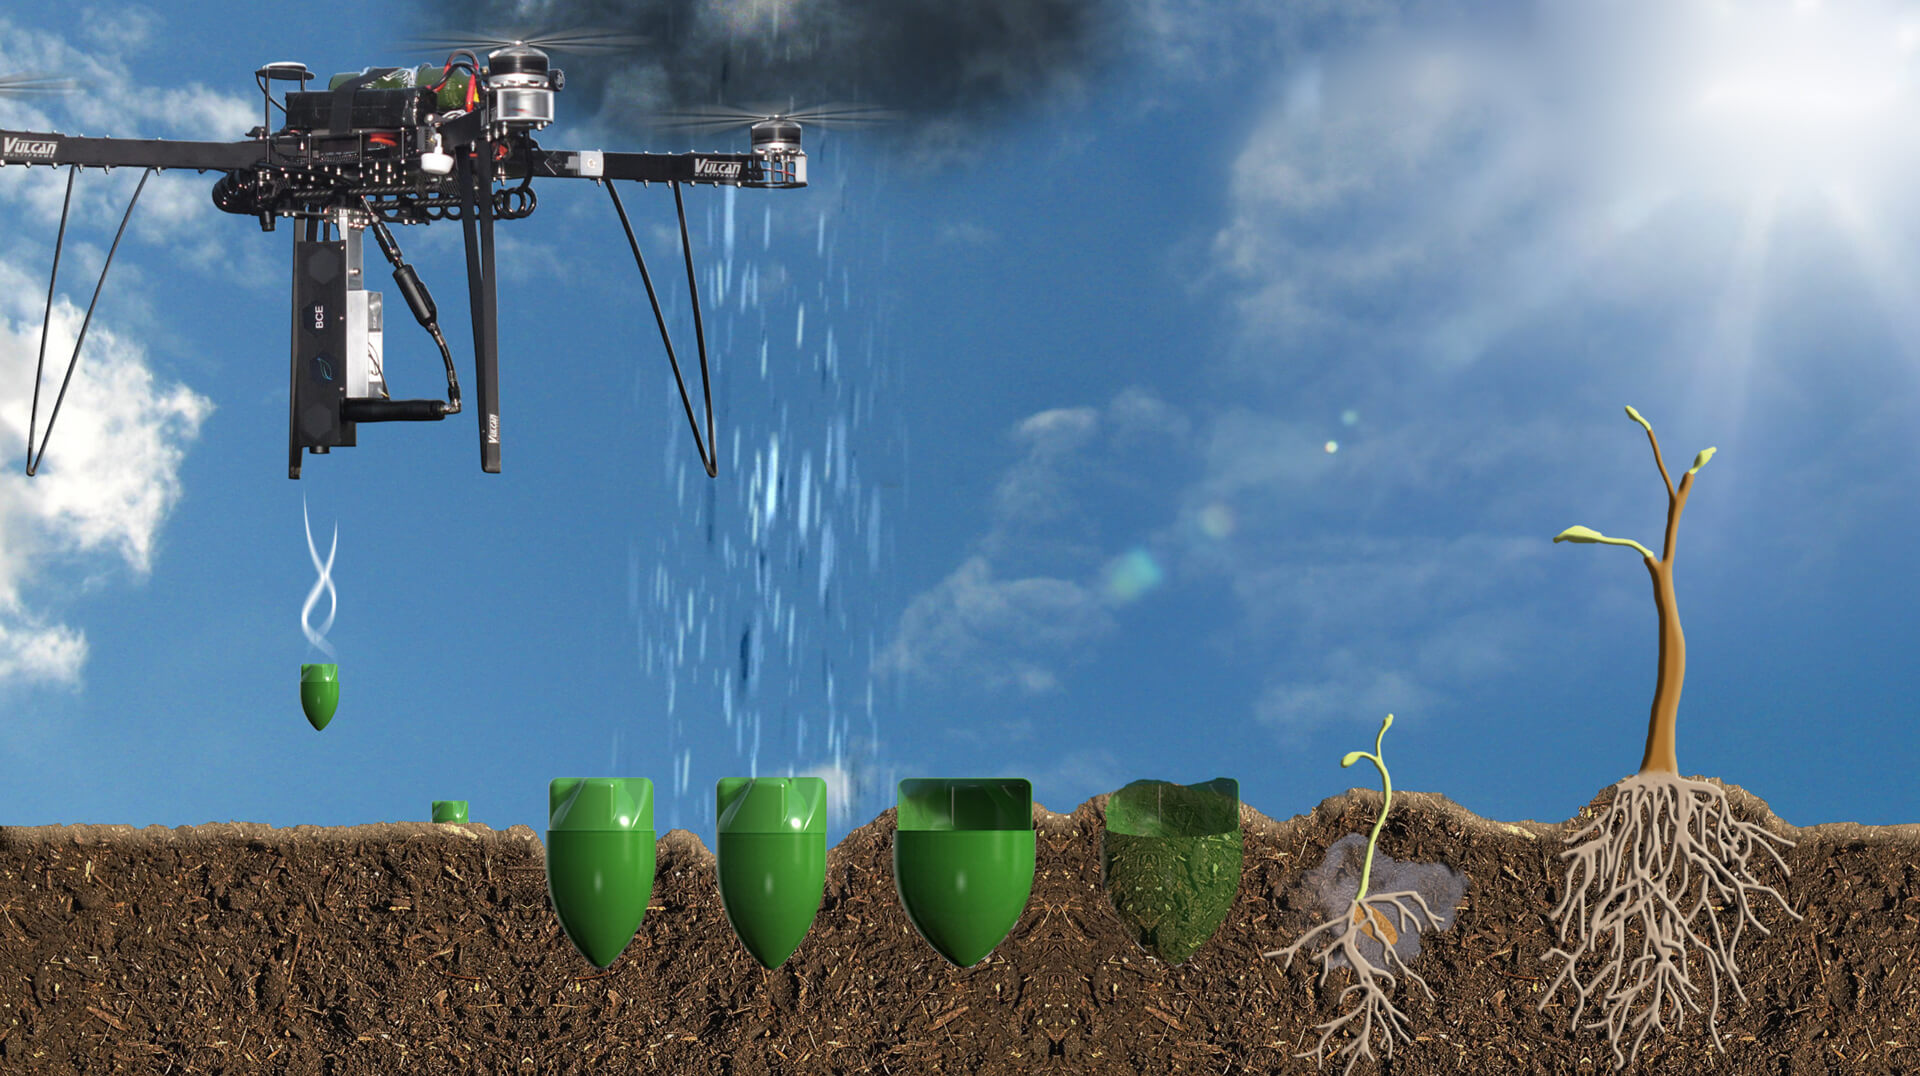 New tree-planting drones can plant 100,000 trees in a single day